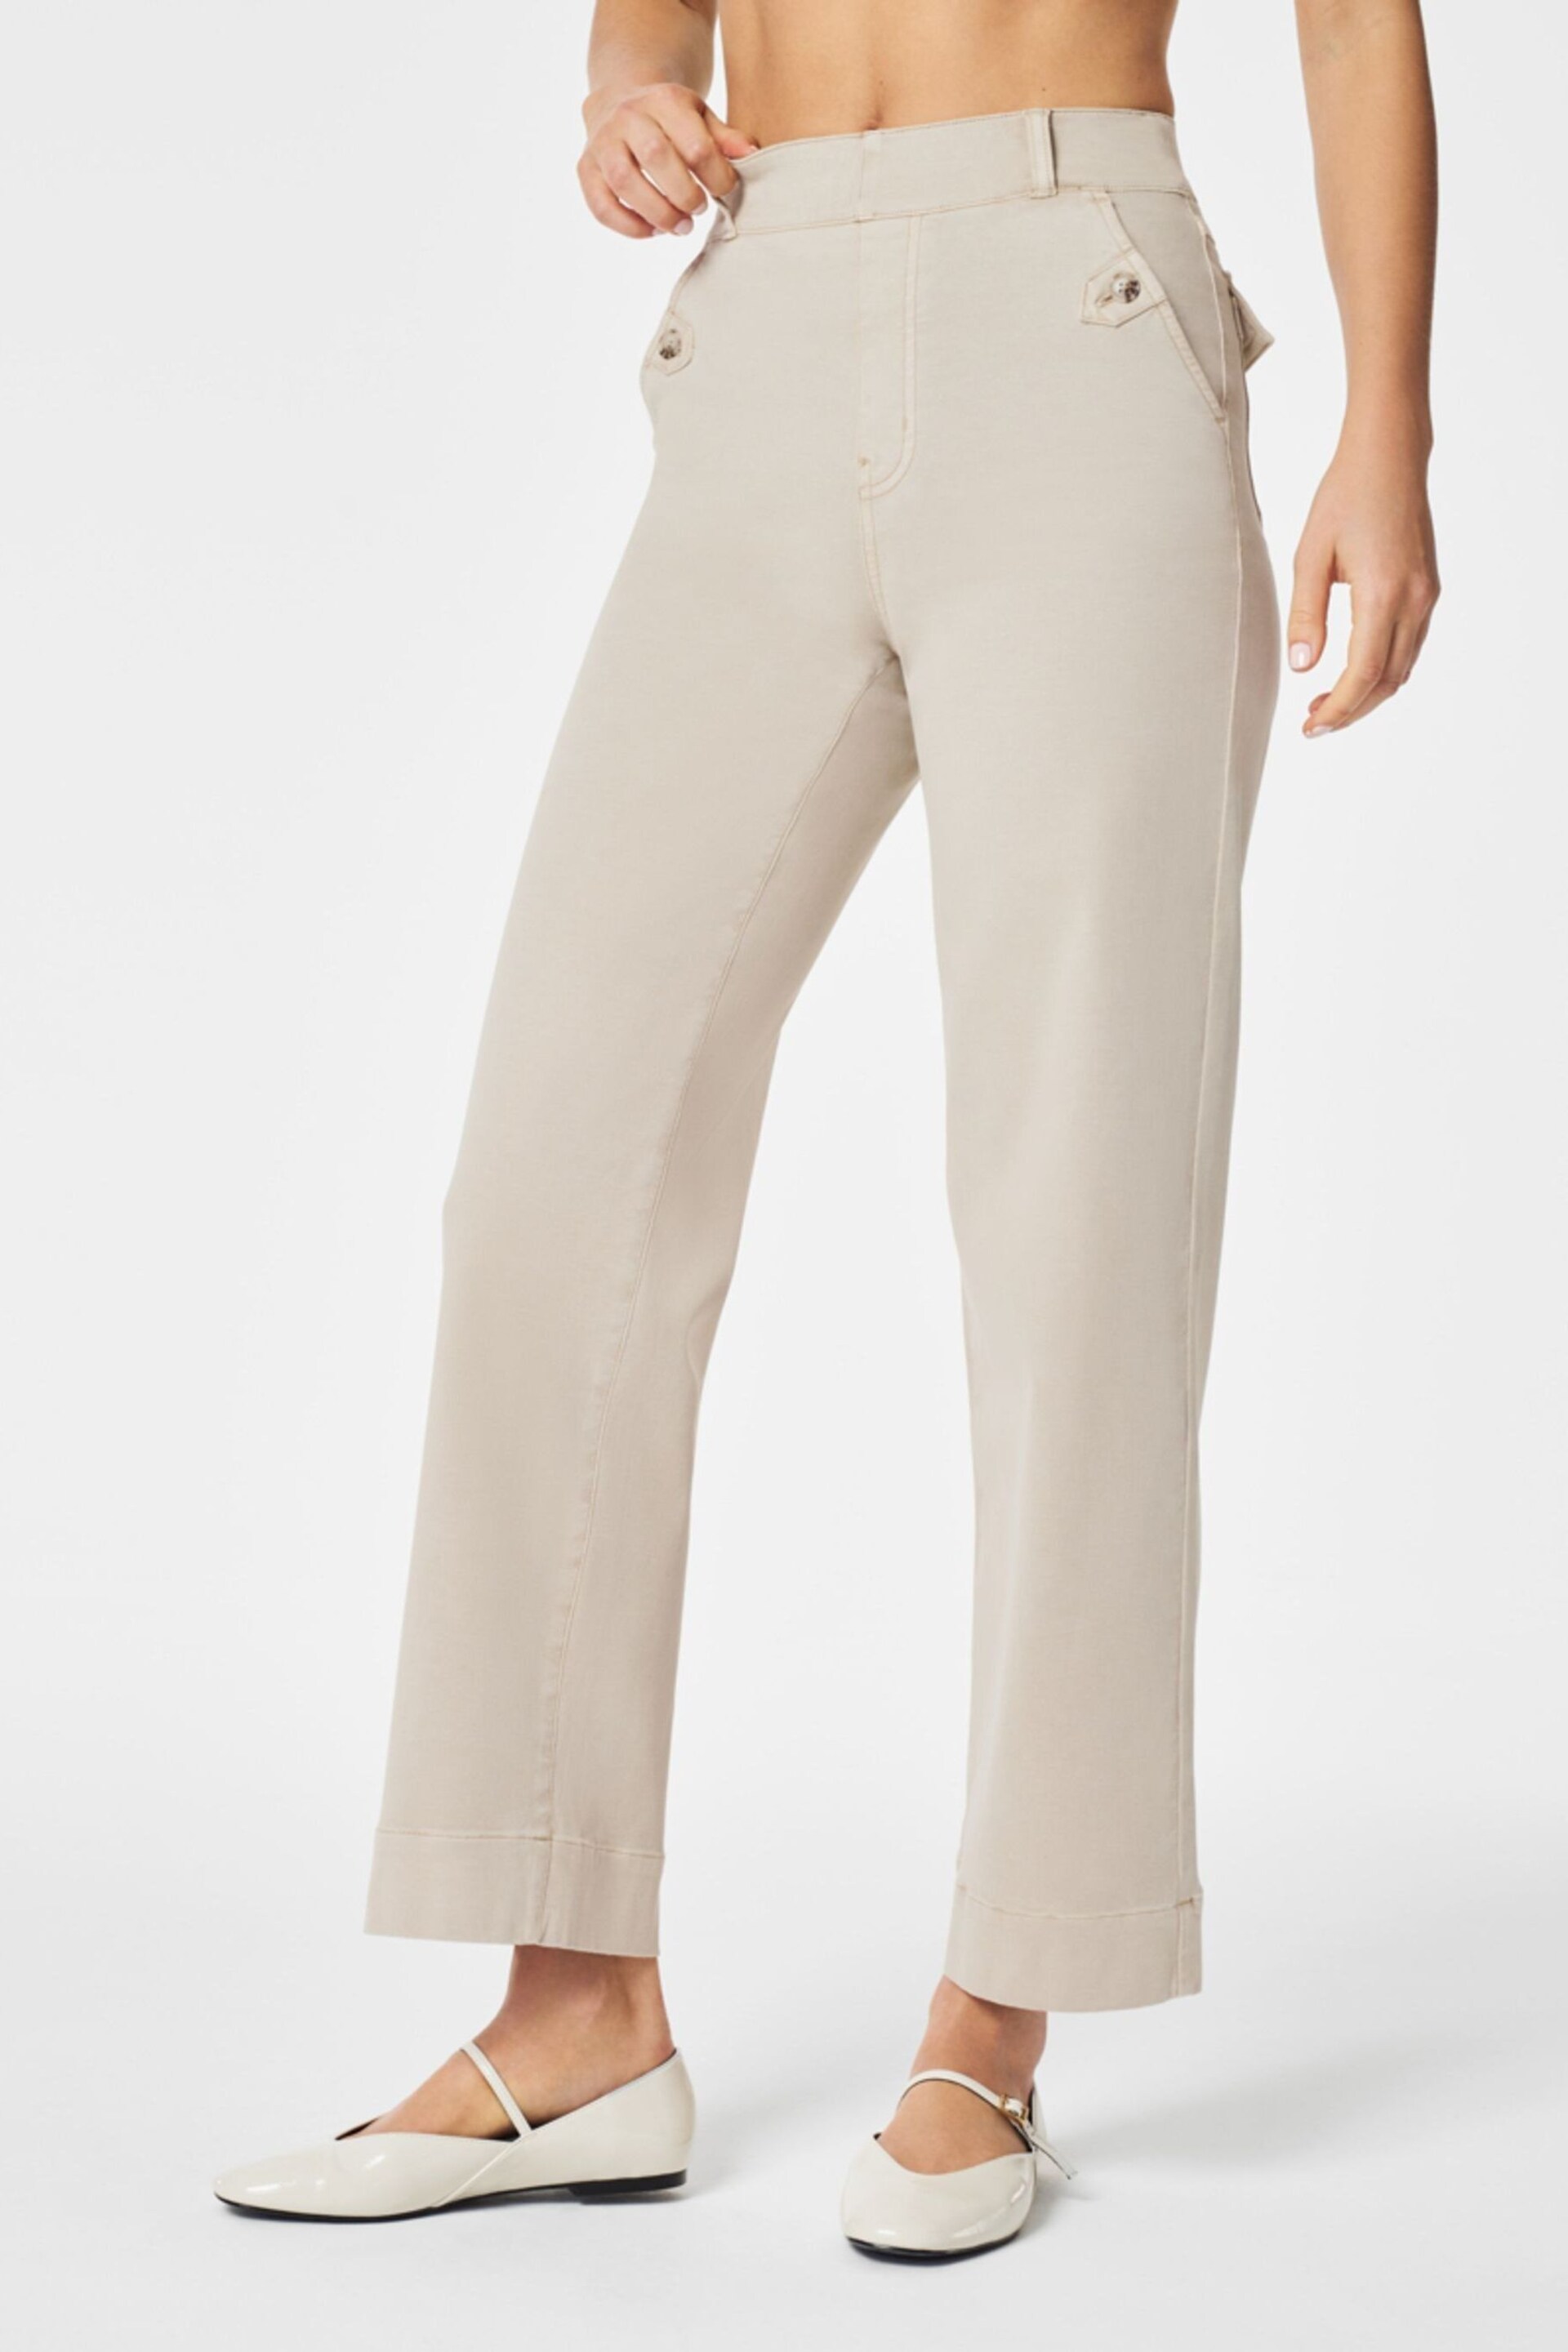 Spanx Stretch Twill Cropped Wide Leg Natural Trousers - Image 1 of 6